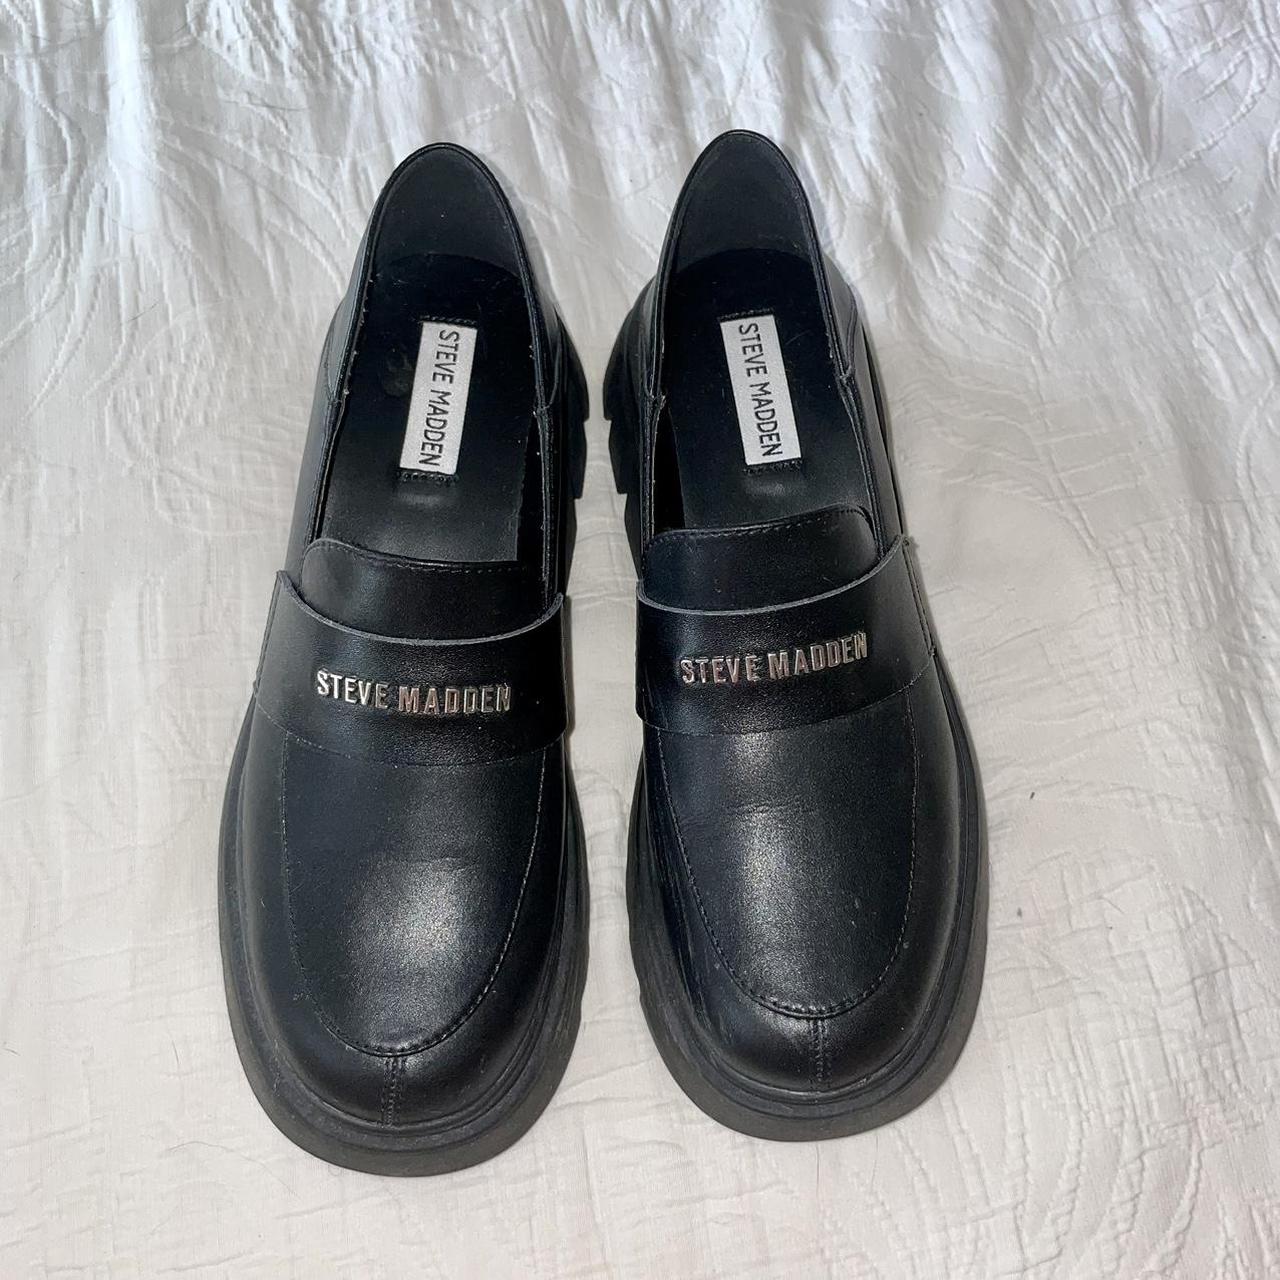 Steve Madden chunky loafers size au 8 bought for... - Depop